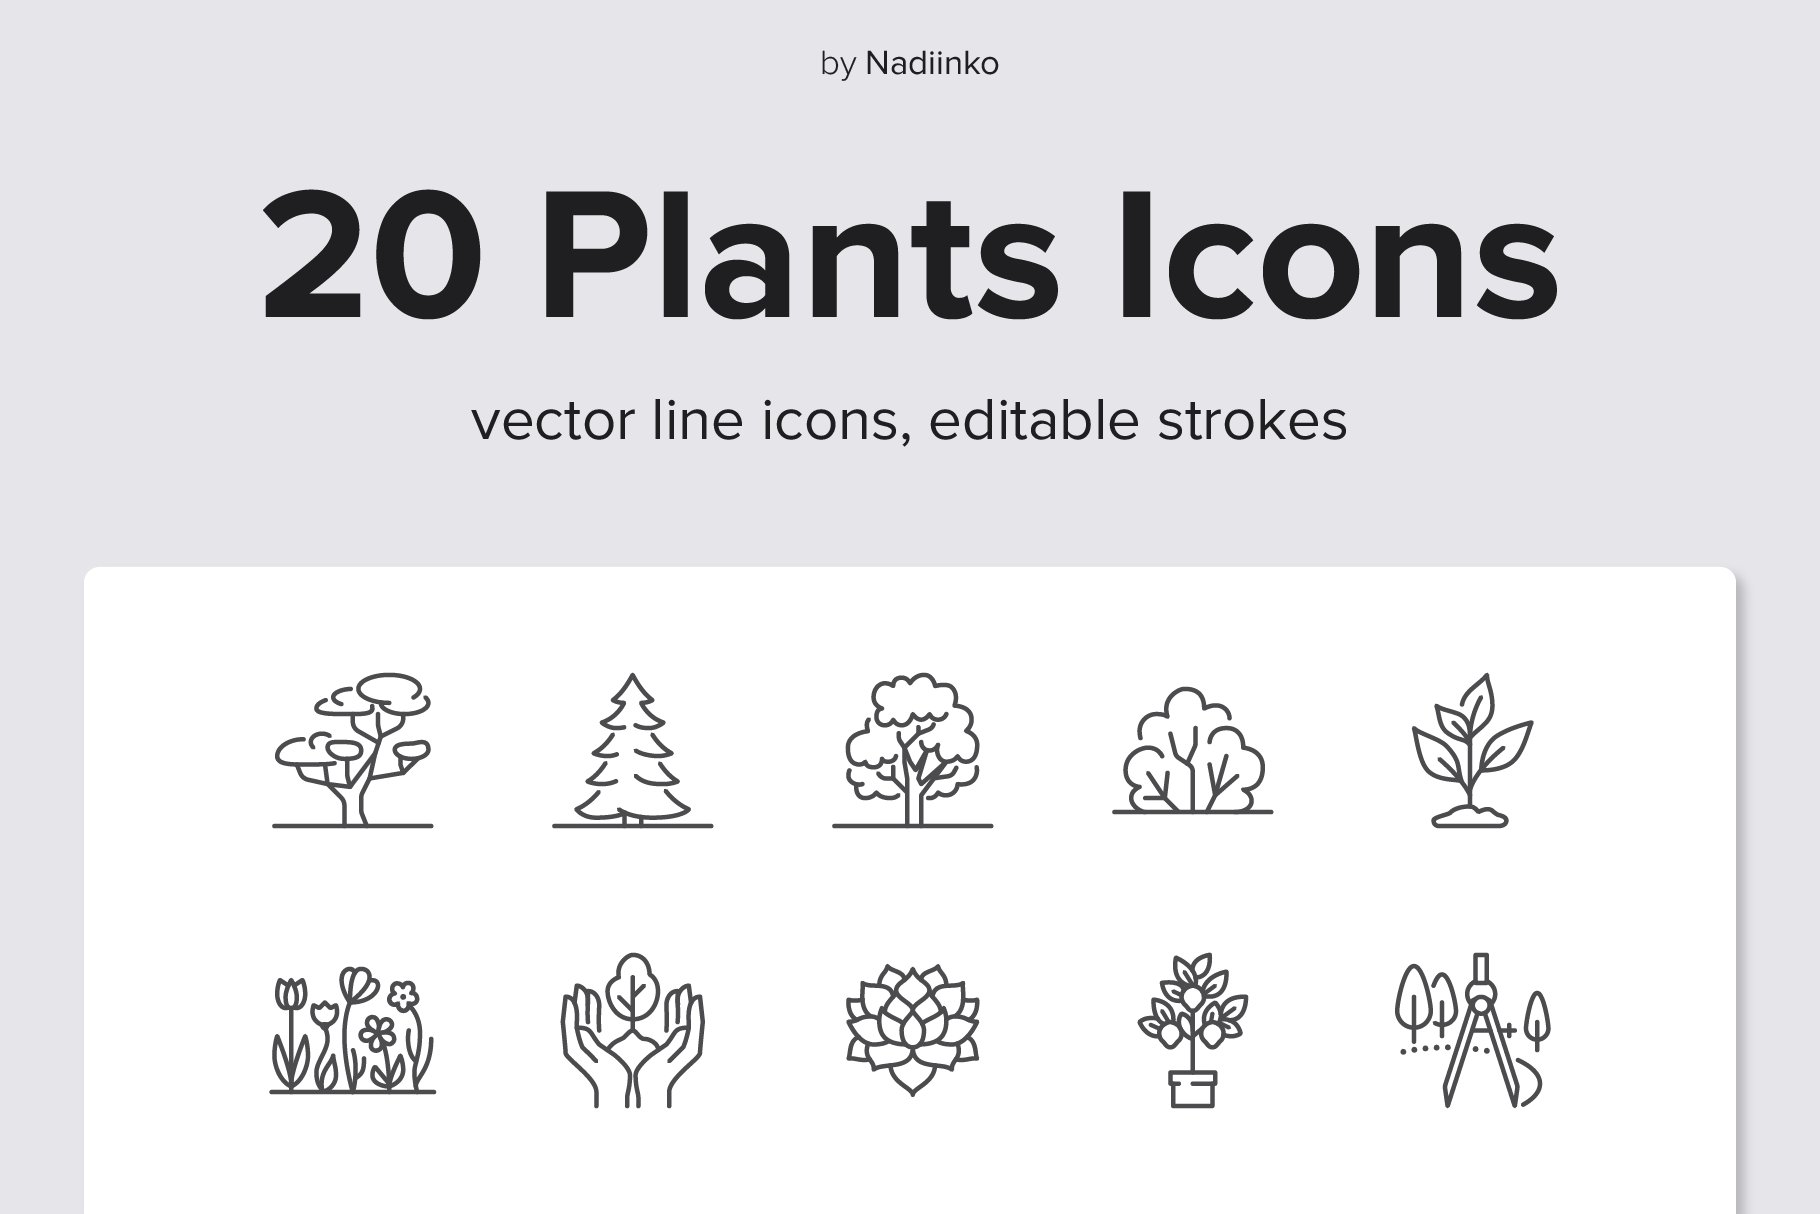 Plants Line Icons cover image.